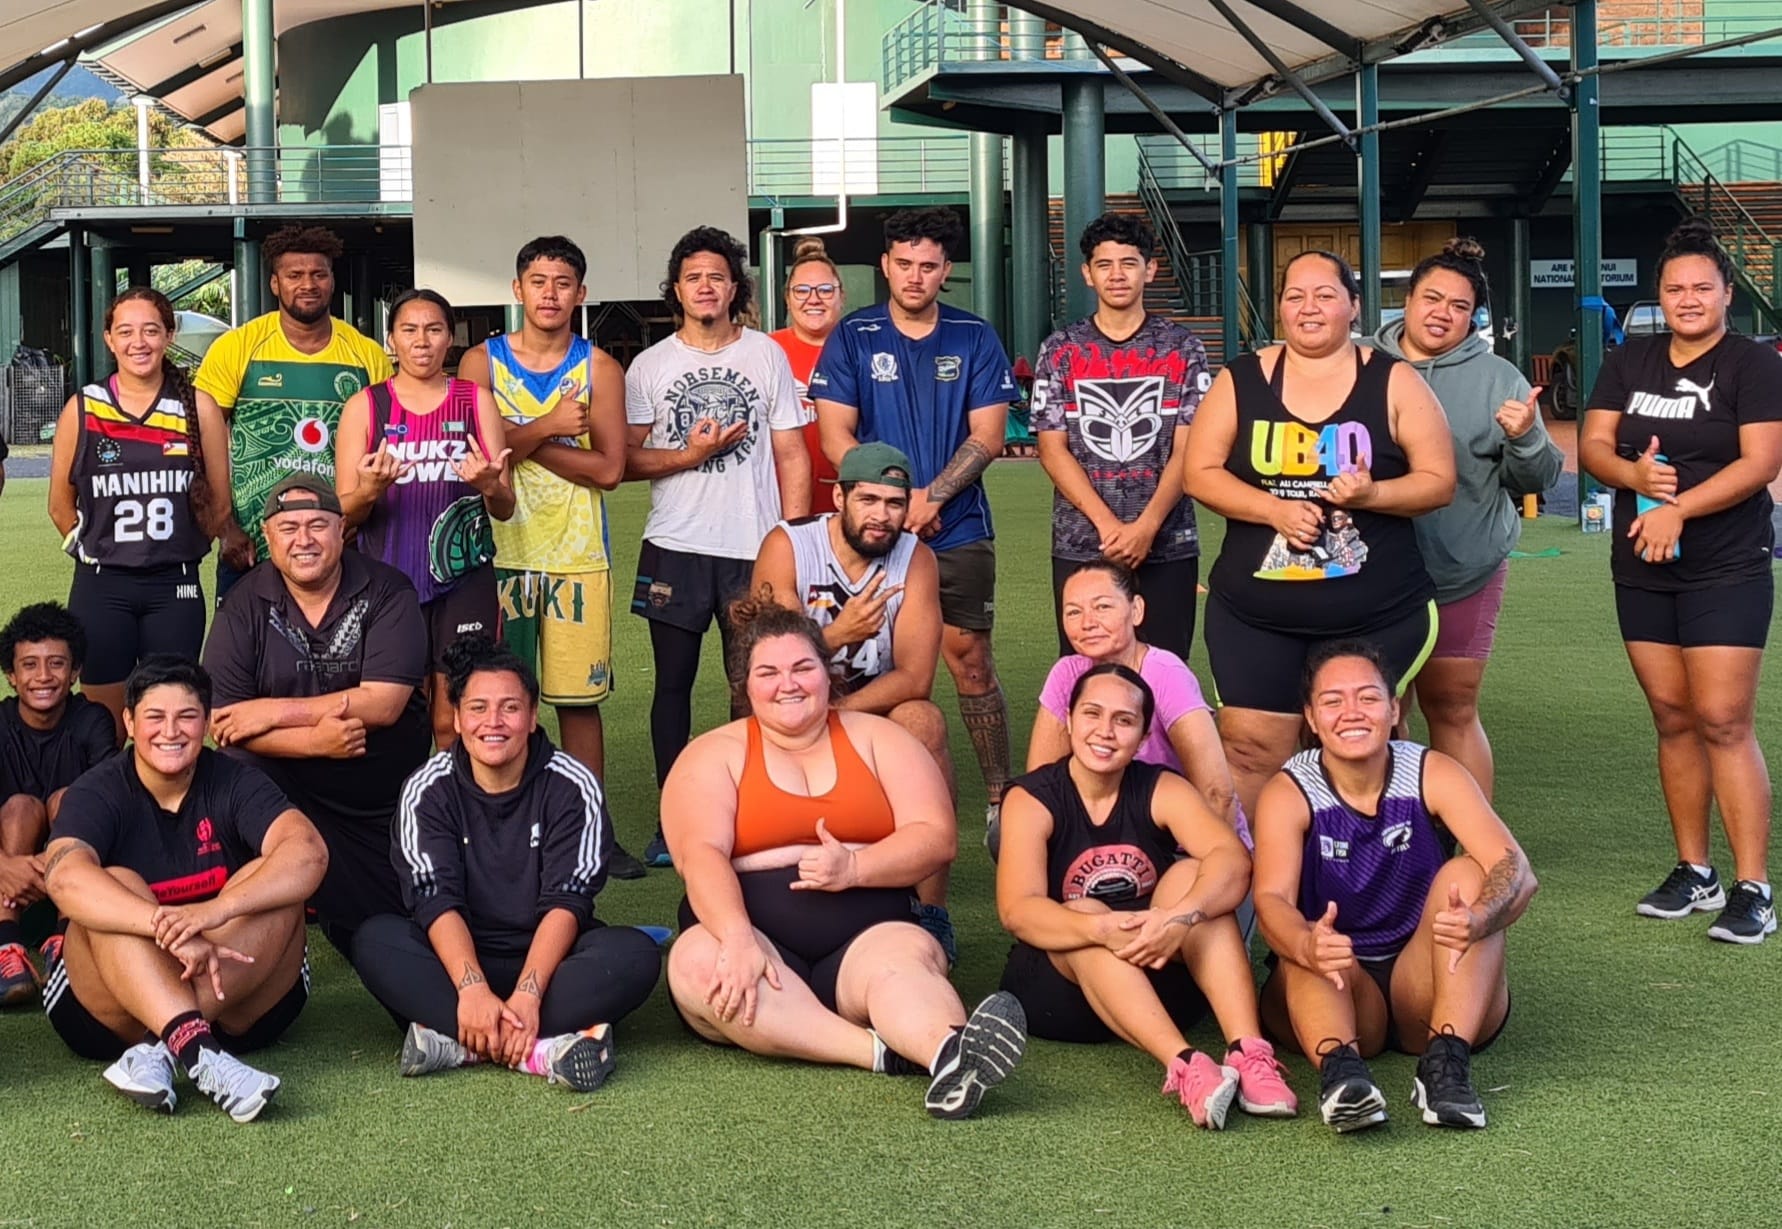 Black Ferns star gives back to community through mentoring